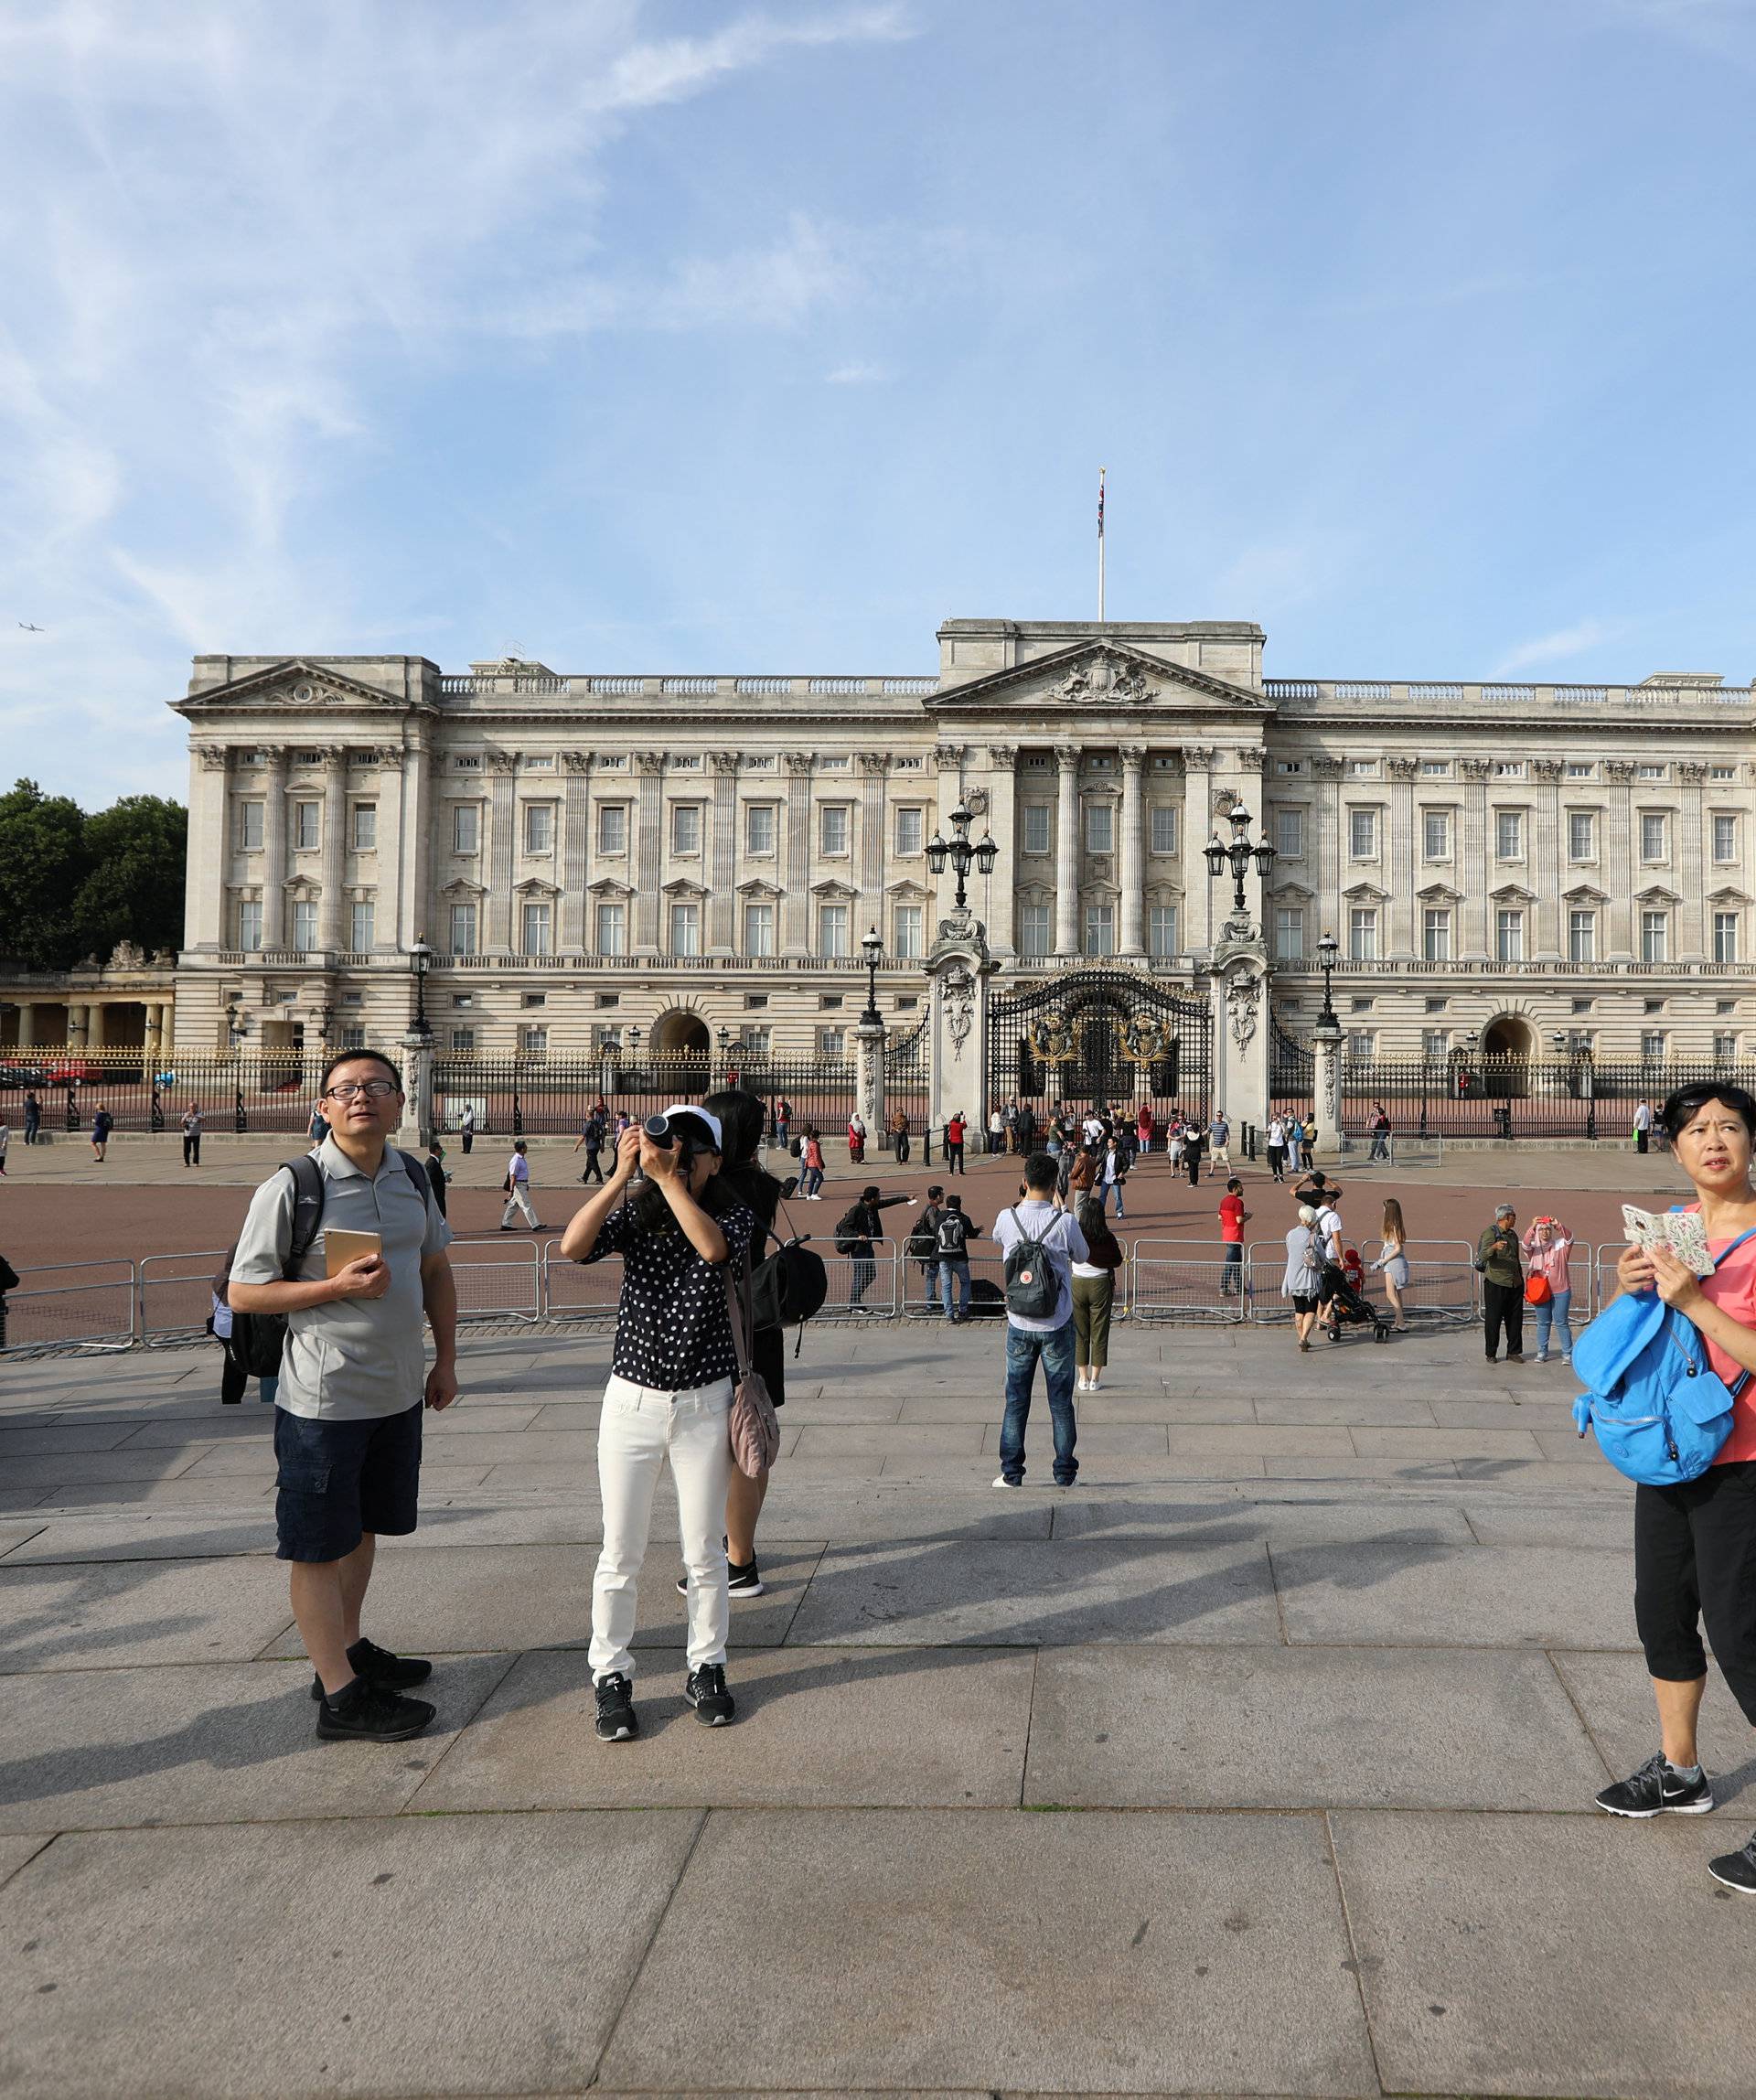 Tourists are seen outside Buckingham Palace in London